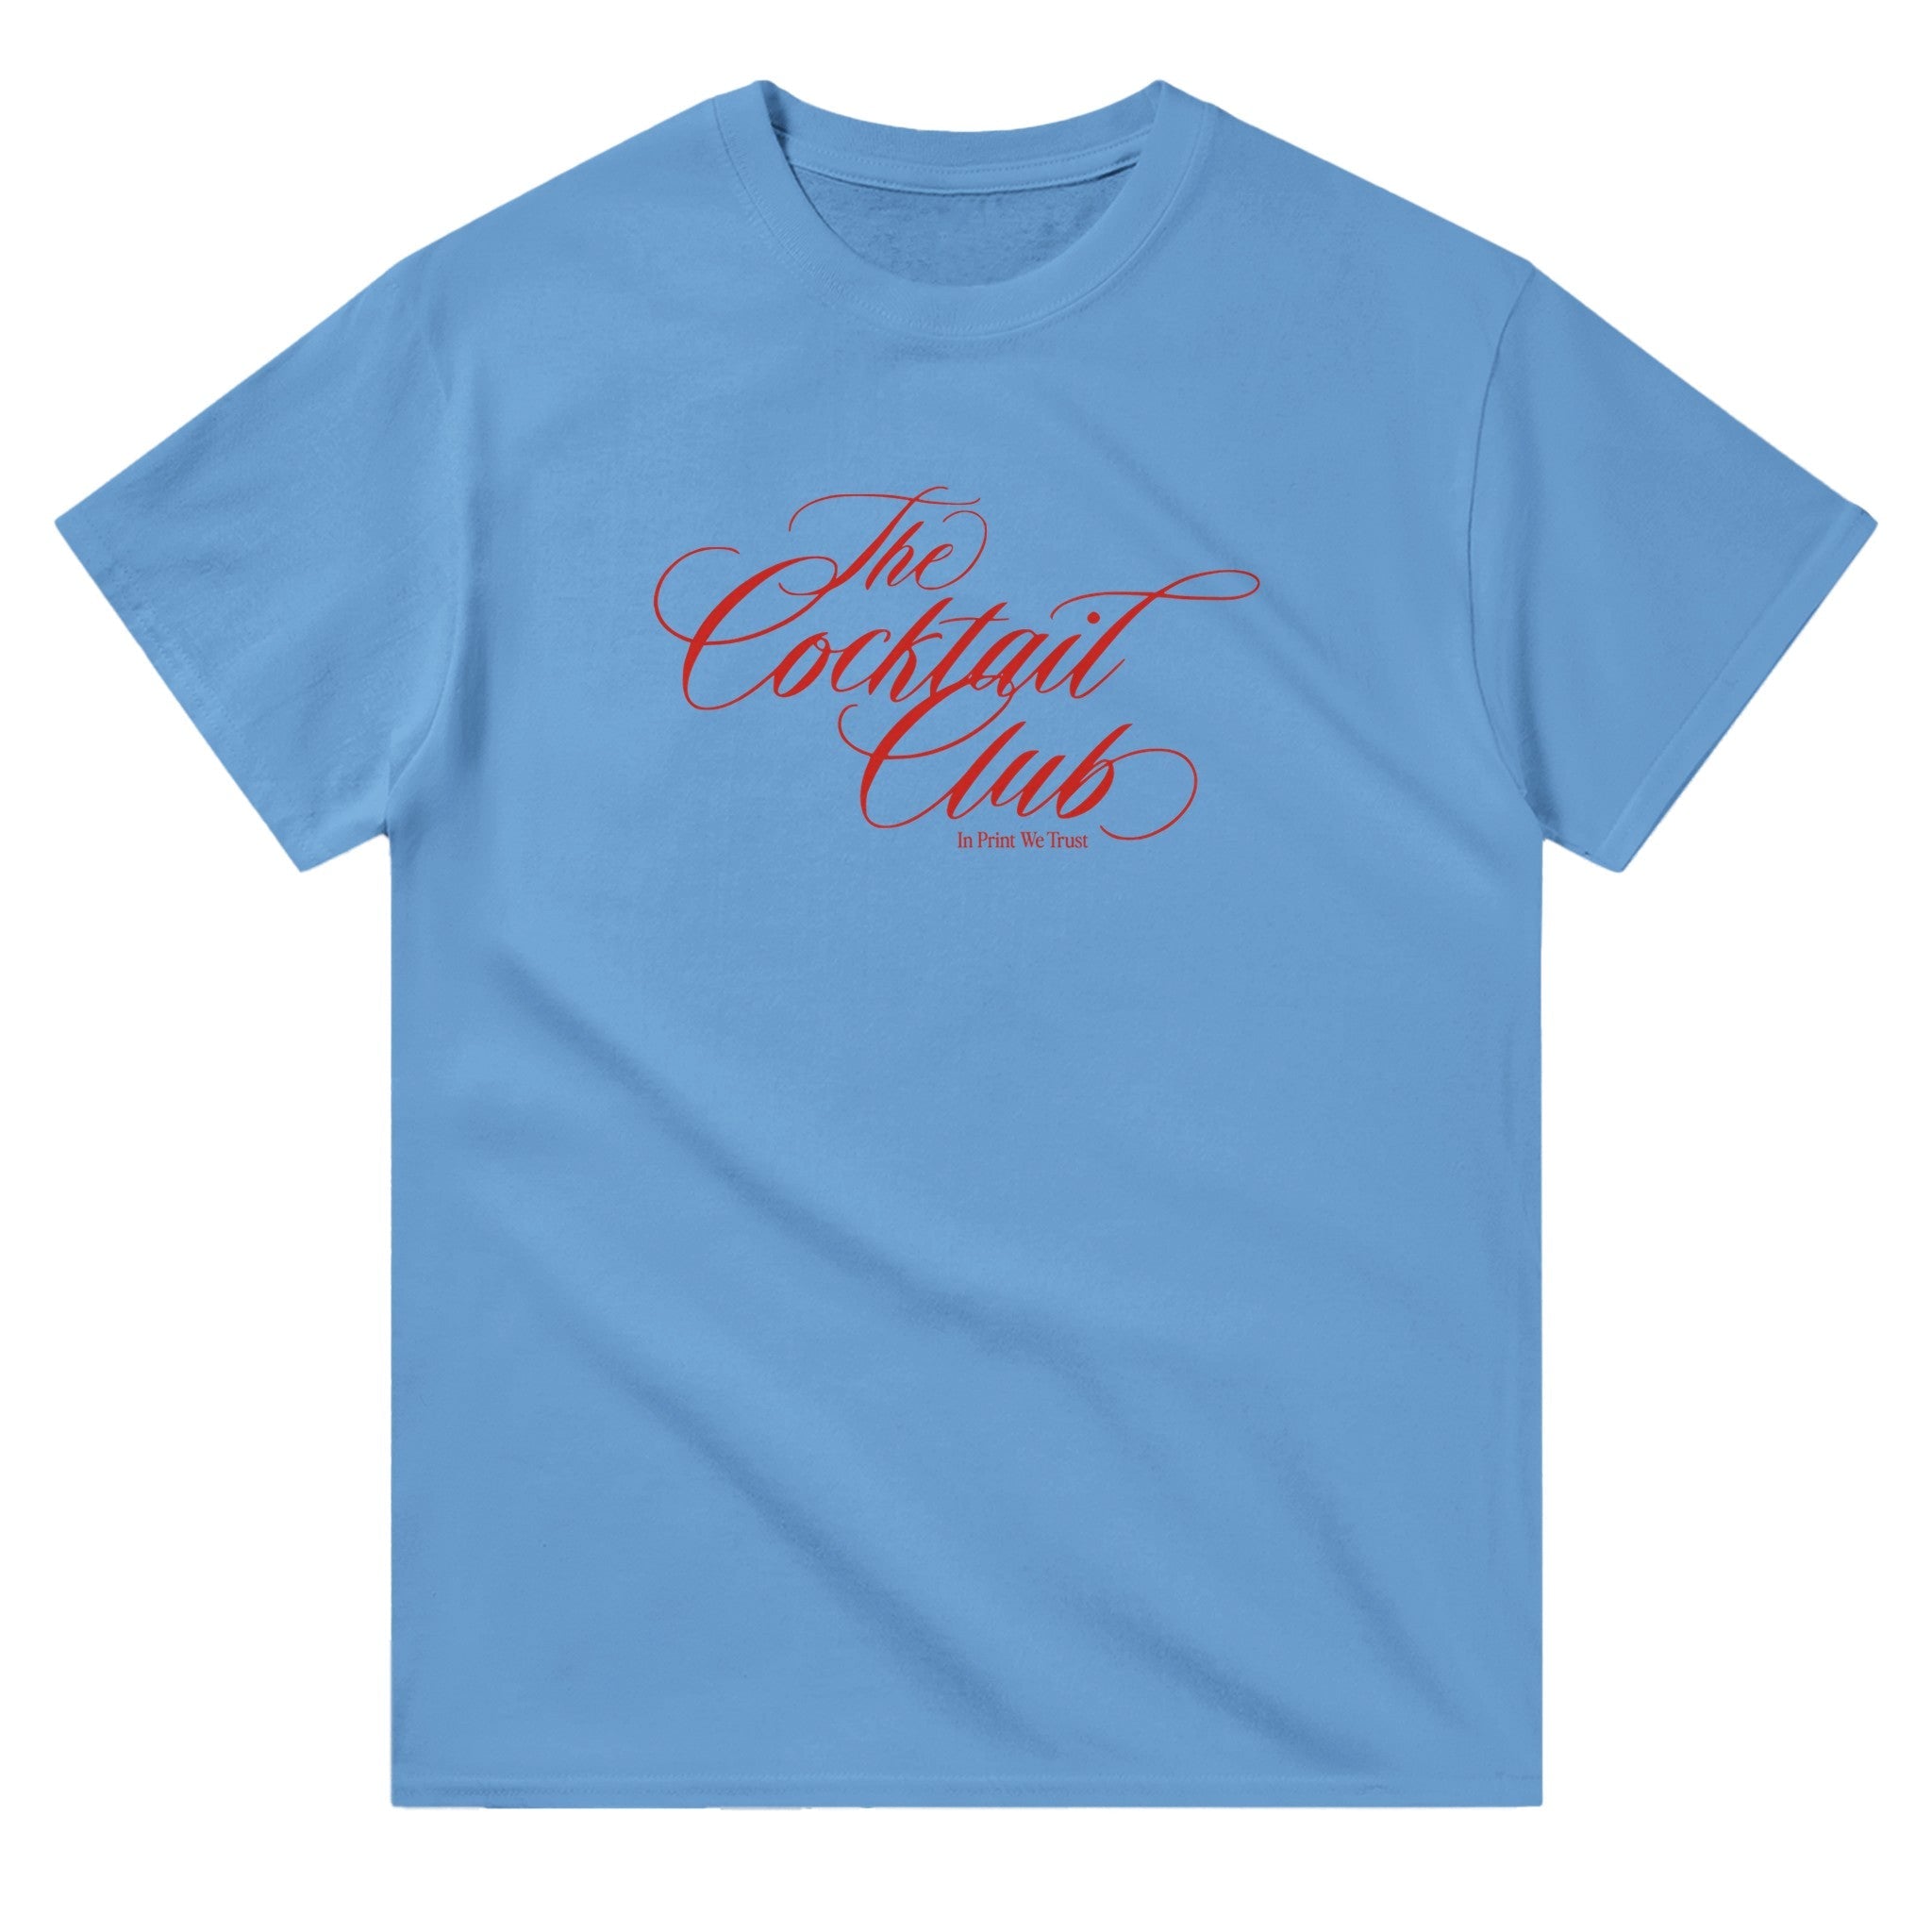 'The Cocktail Club' classic tee - In Print We Trust